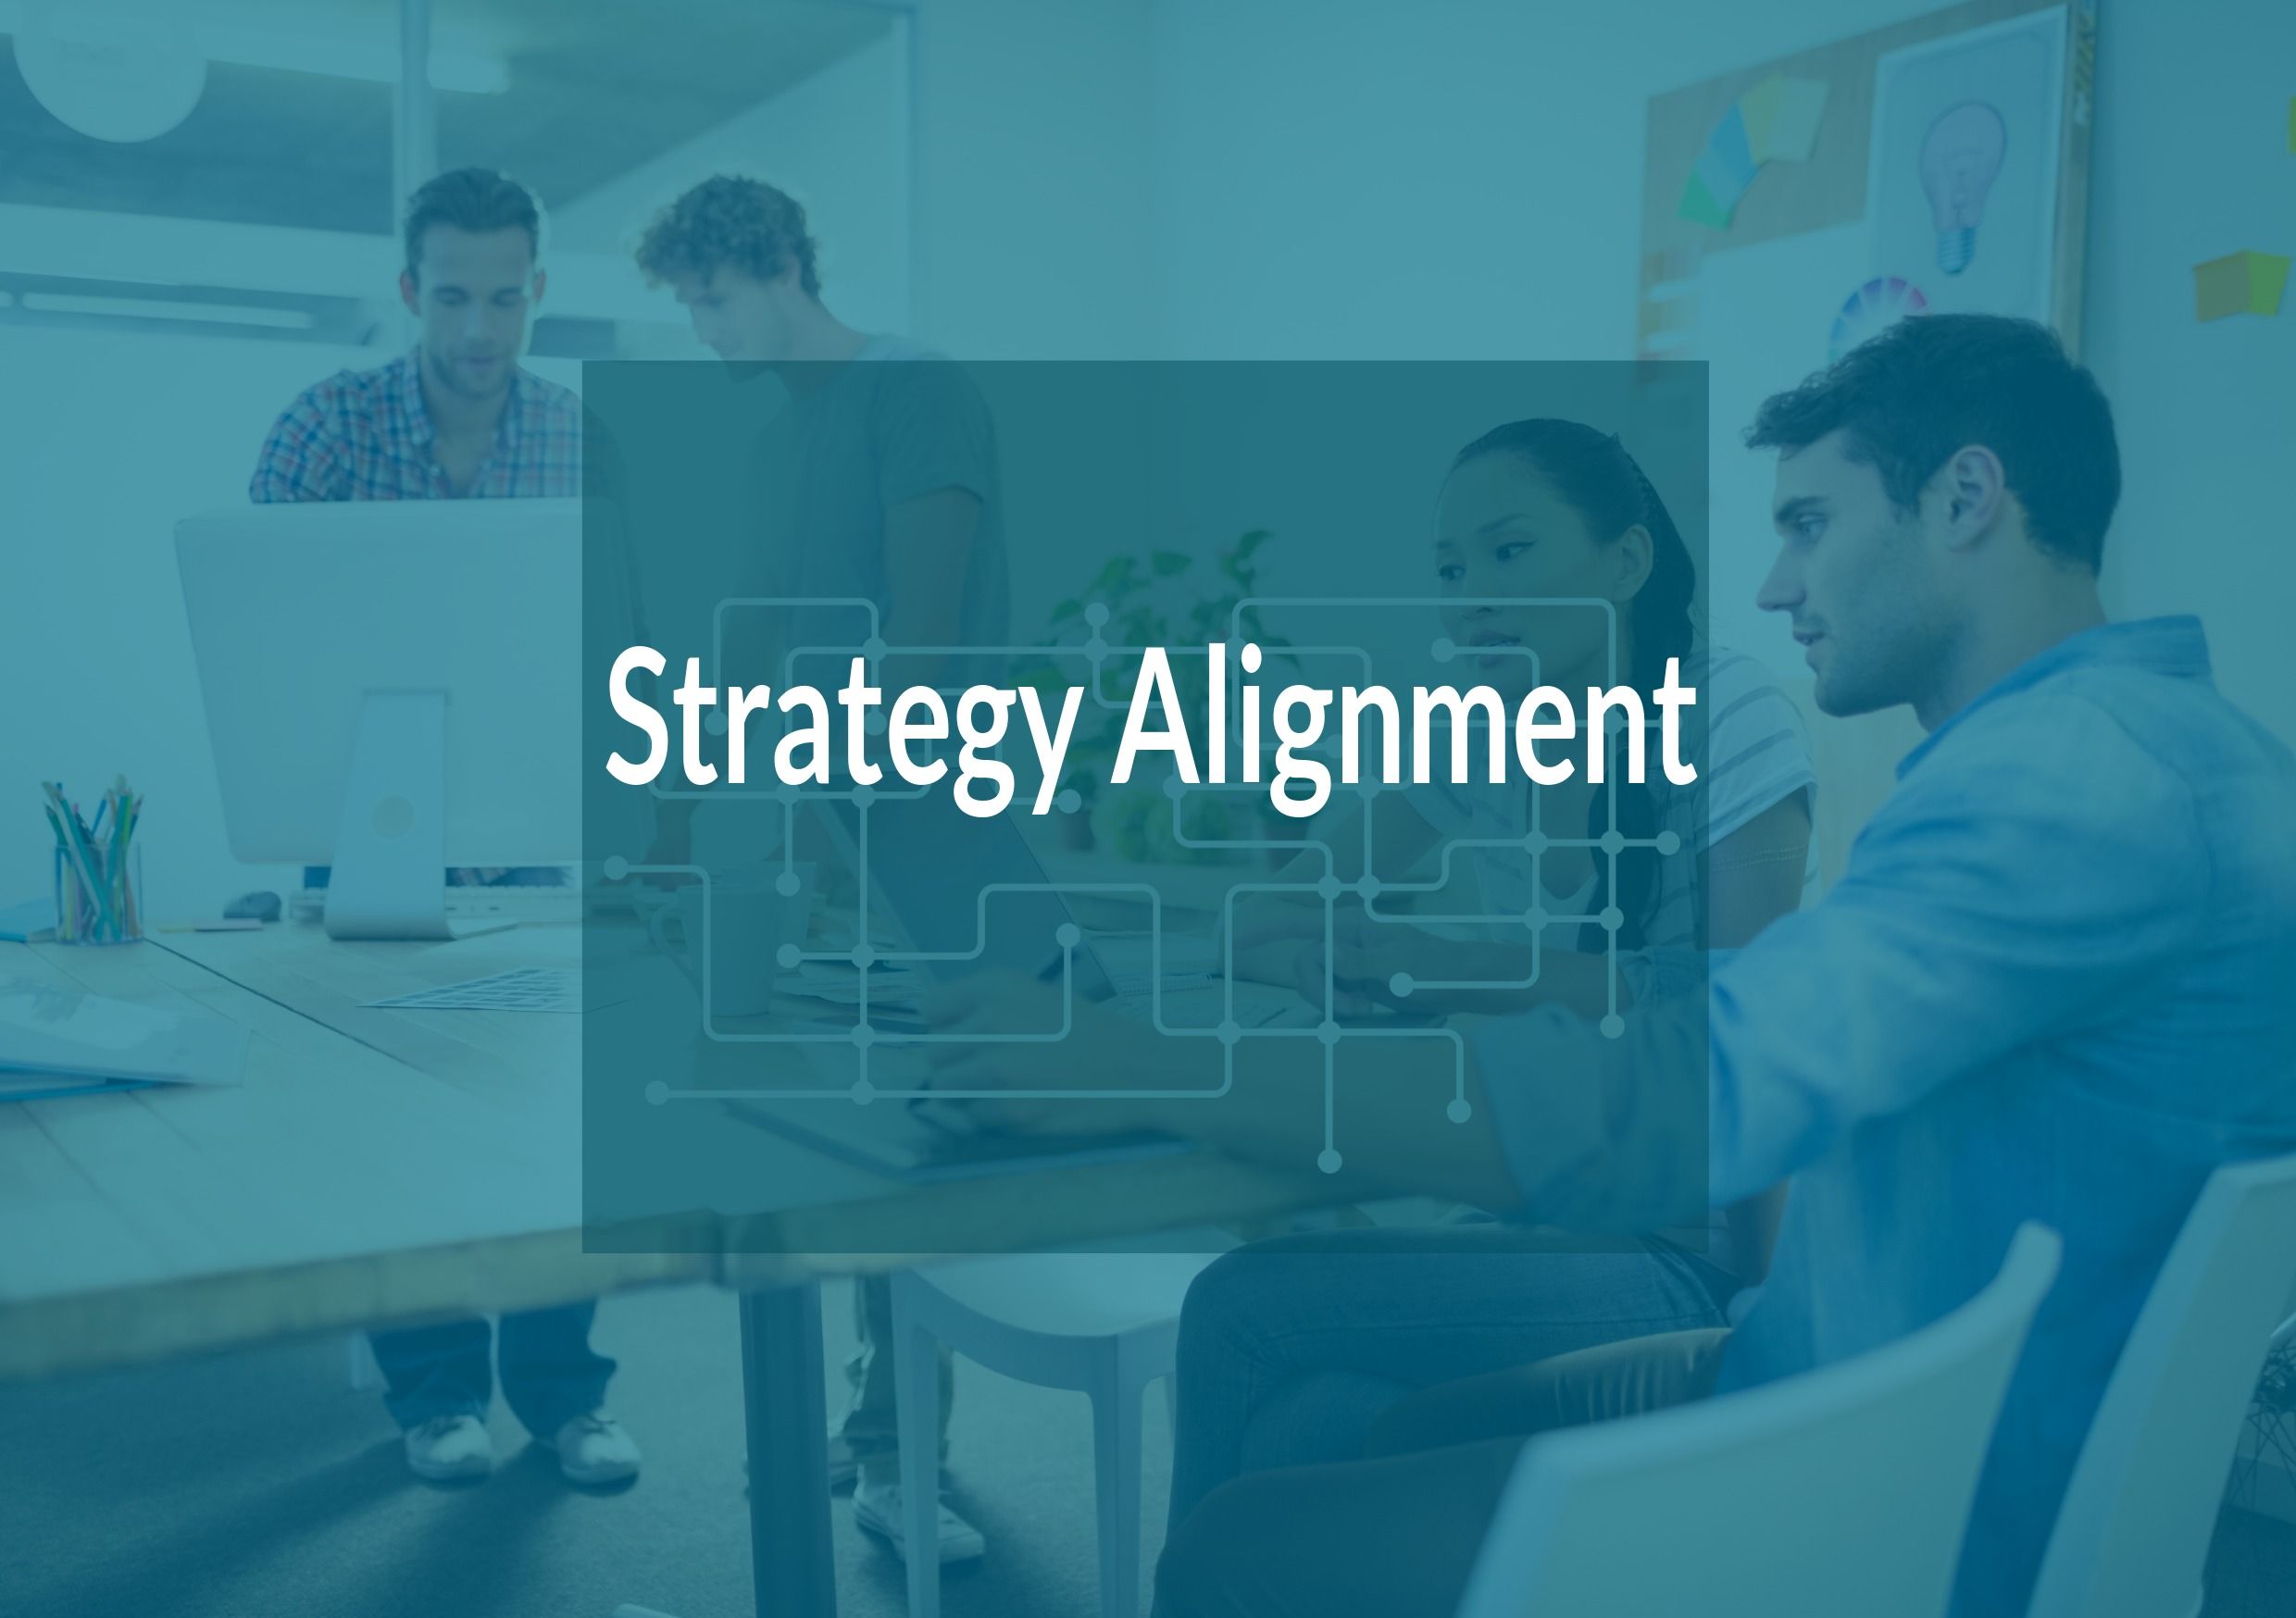 Text Strategy Alignment in white on a background image of a business meeting with a green tint - Product position: why is it important - Image